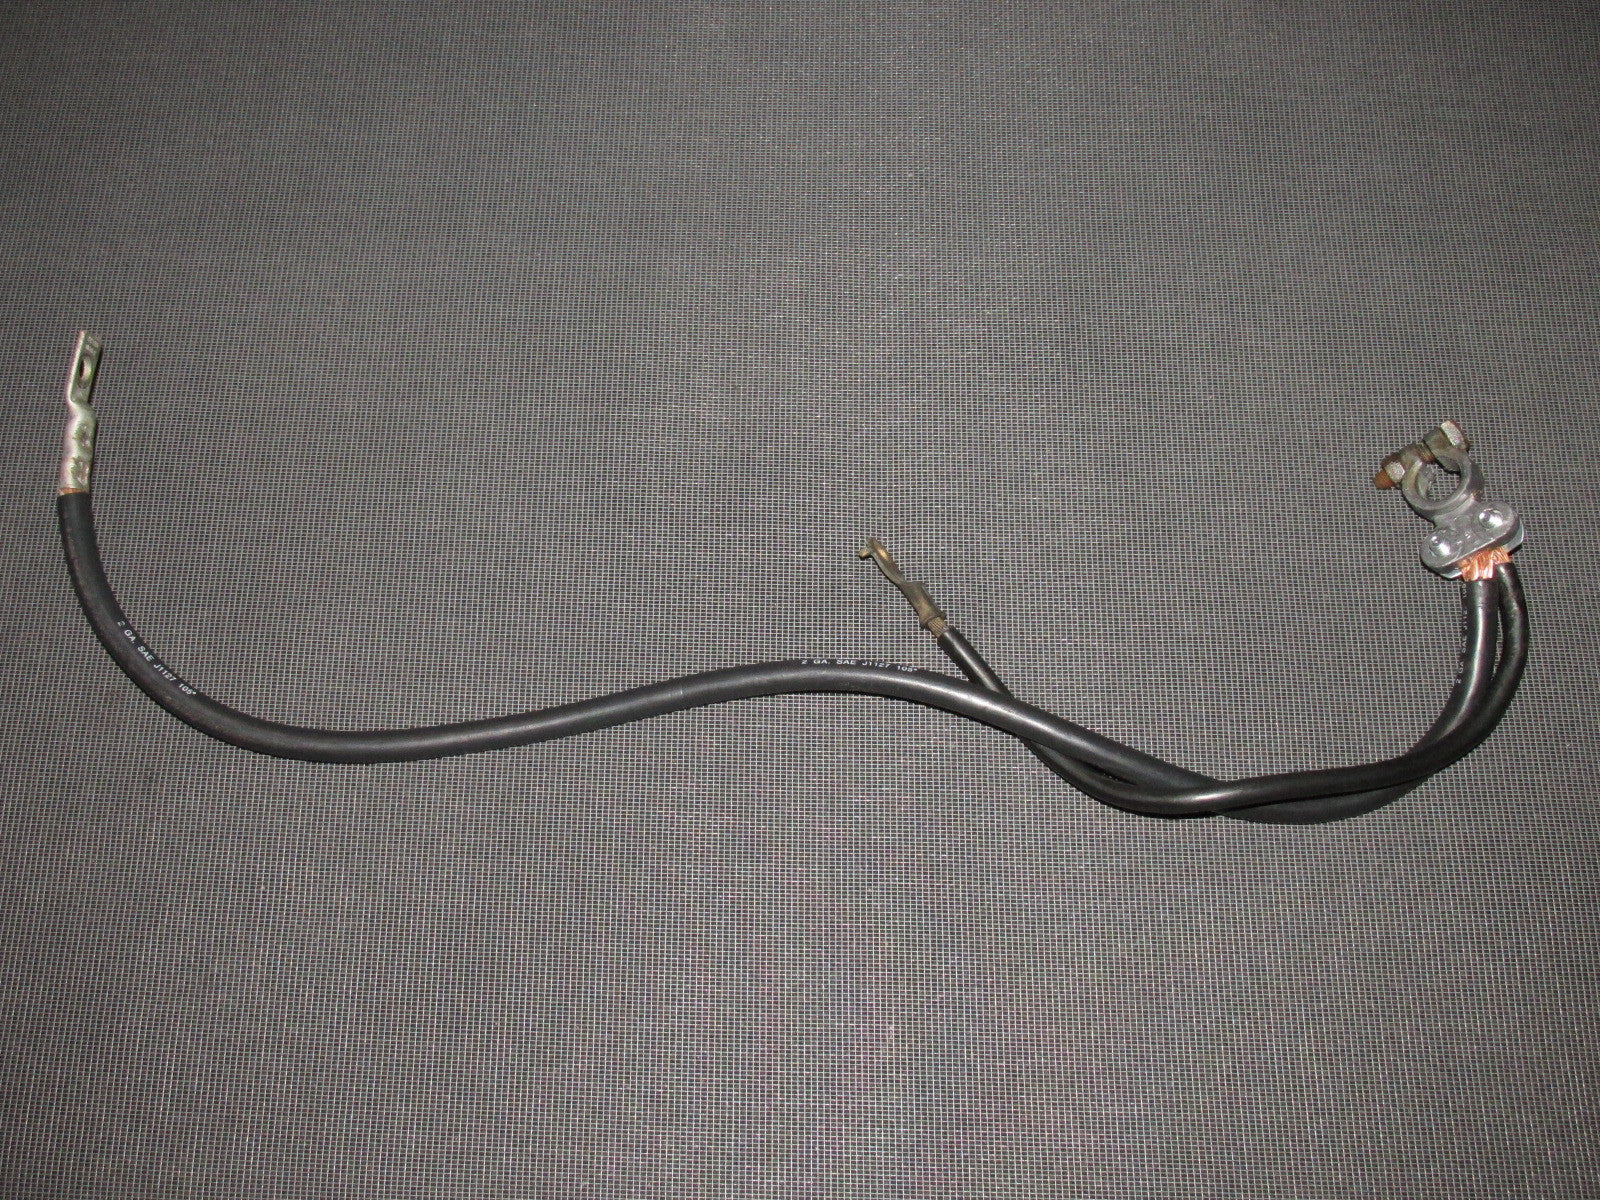 01 02 03 Acura CL OEM Battery Cable - Negative